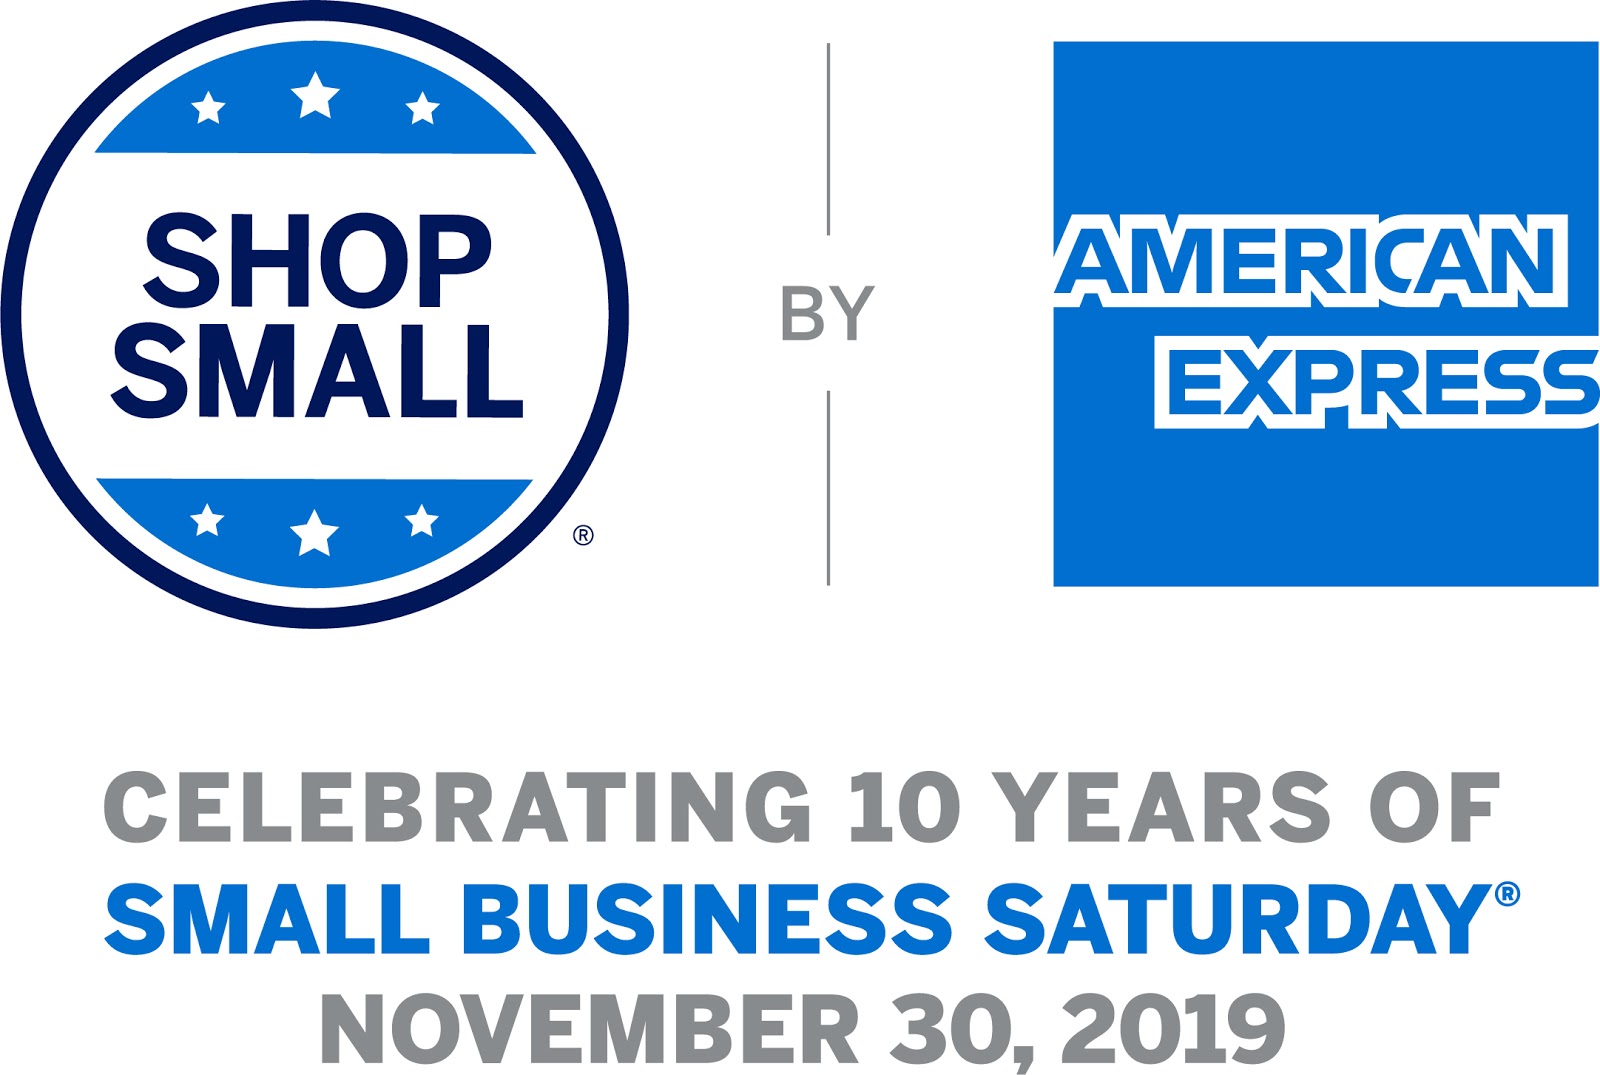 small business saturday help american express company make money